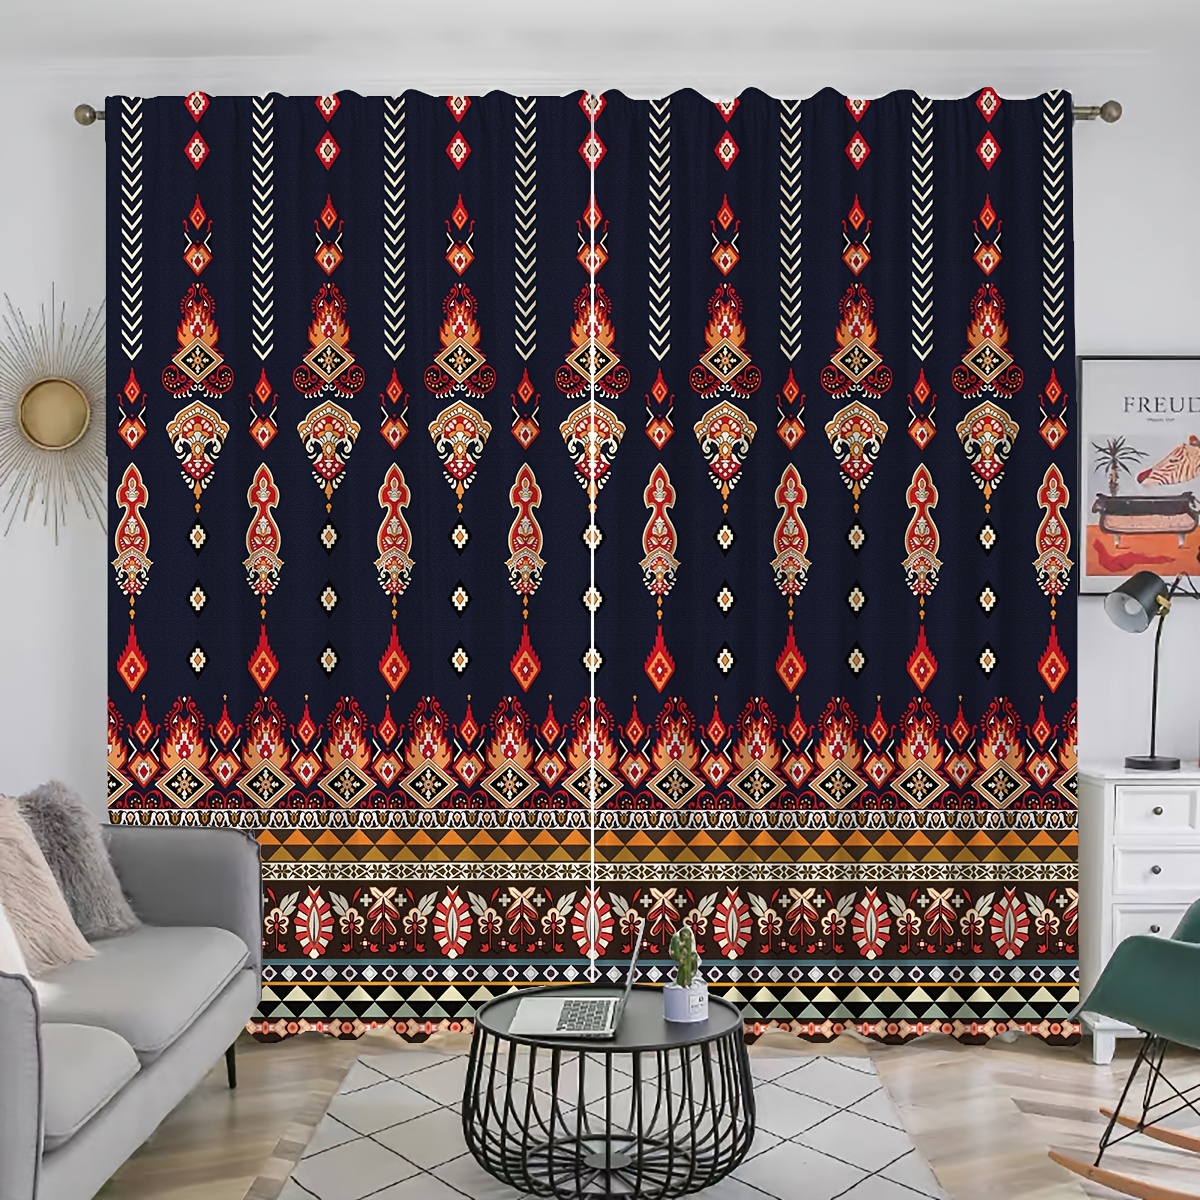 

2pcs, Mexican Themed Geometric Pattern Curtains, Rod Pocket Curtain, Suitable For Restaurants, Public Places, Living Rooms, Bedrooms, Offices, Study Rooms, Home Decoration